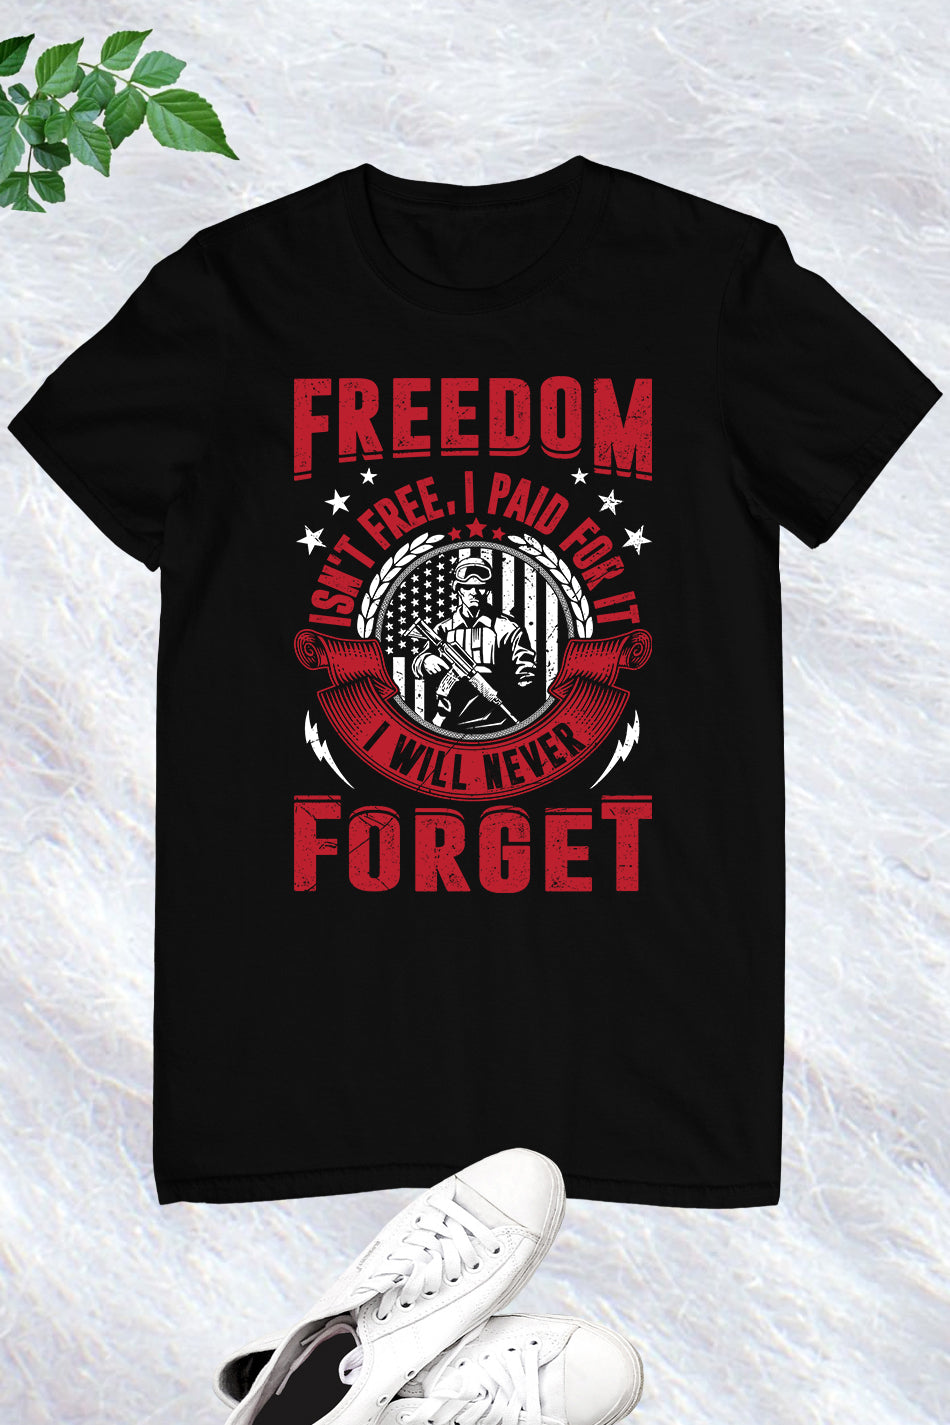 Freedom Isn't Free I Paid For it Shirt